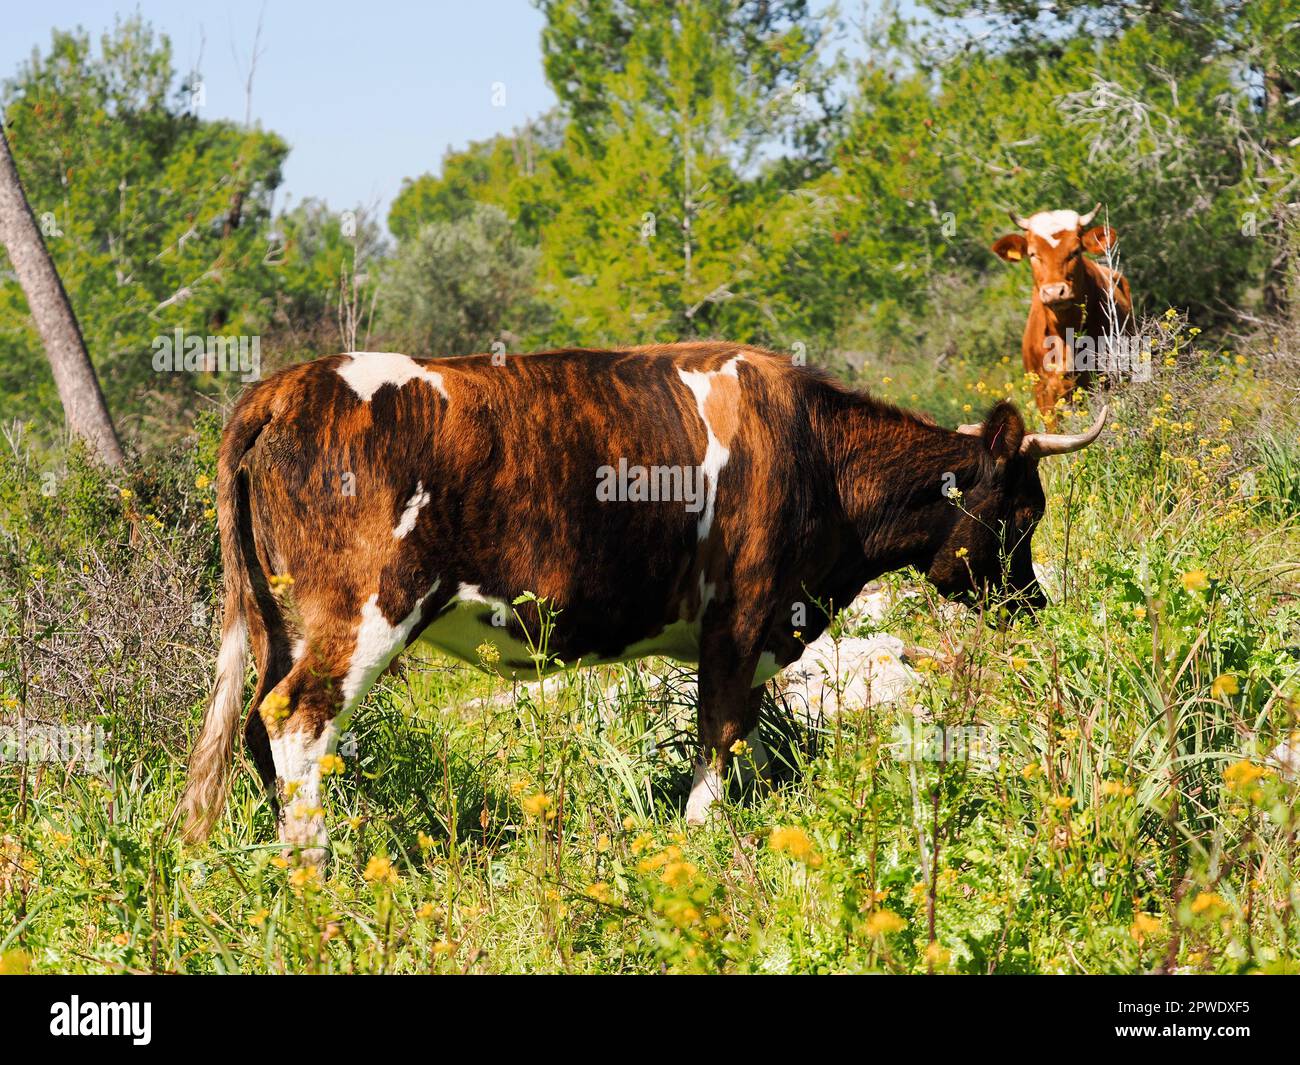 Tiger cow among stunted green bushes Blurred background. Stock Photo